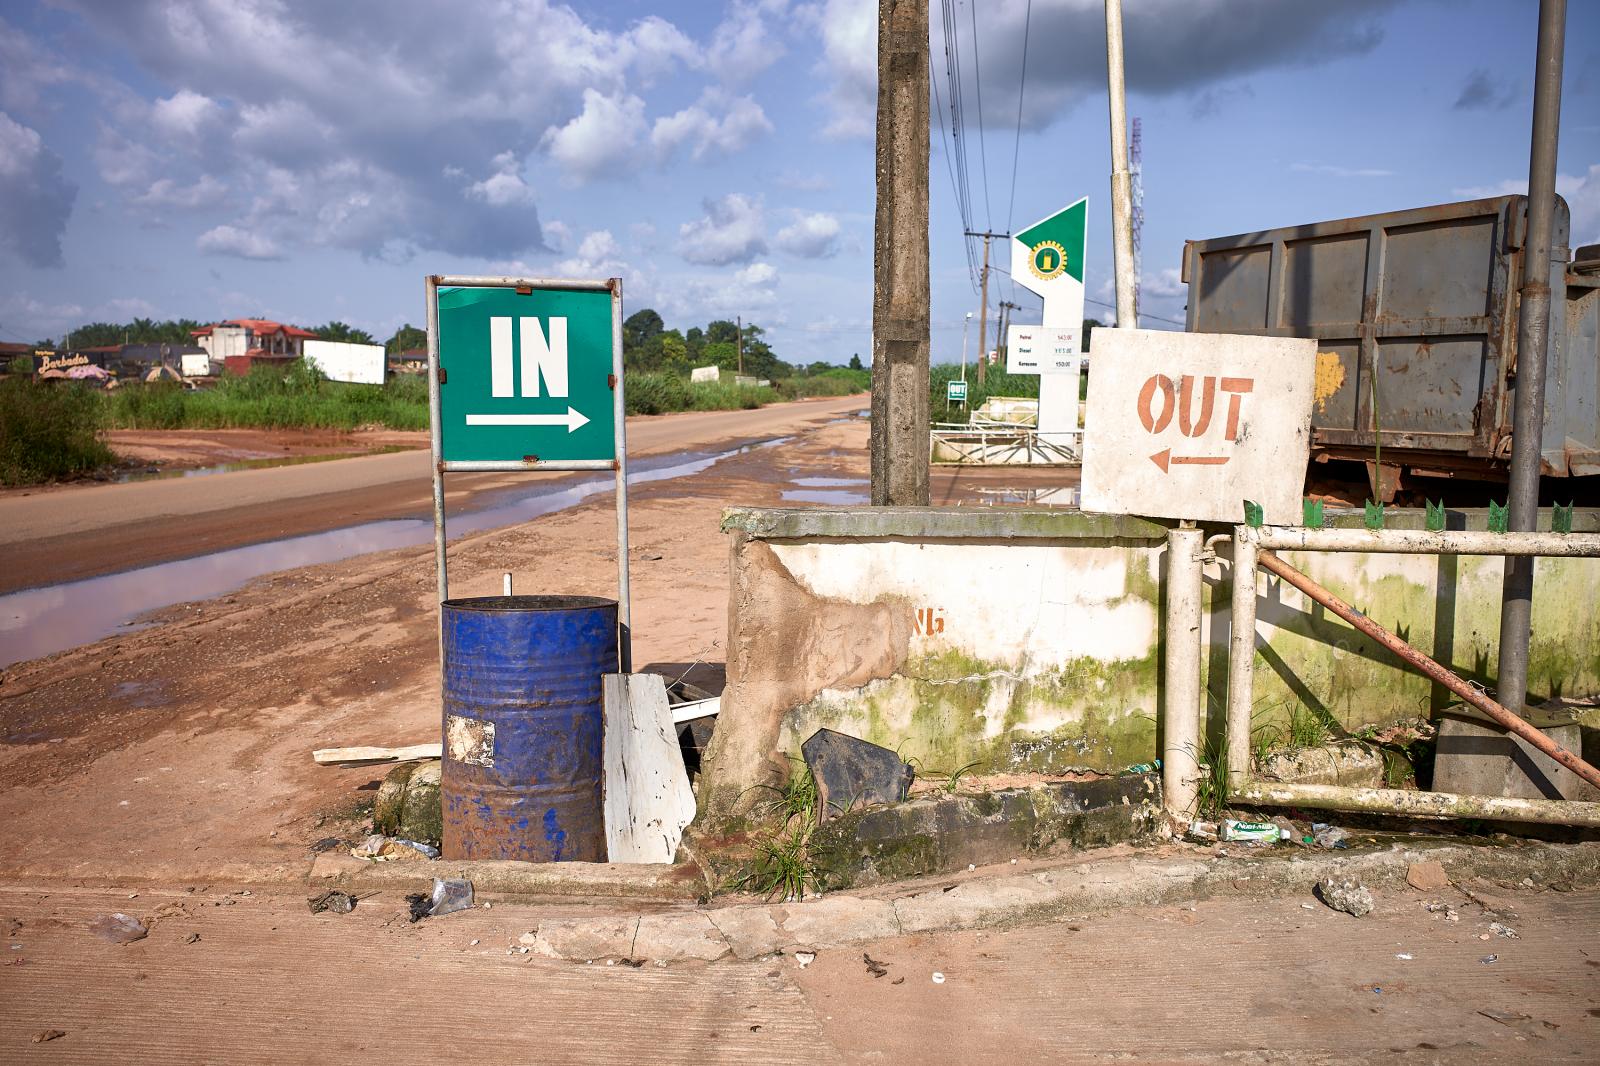  in and out, lagos-benin expressway, nigeria. 